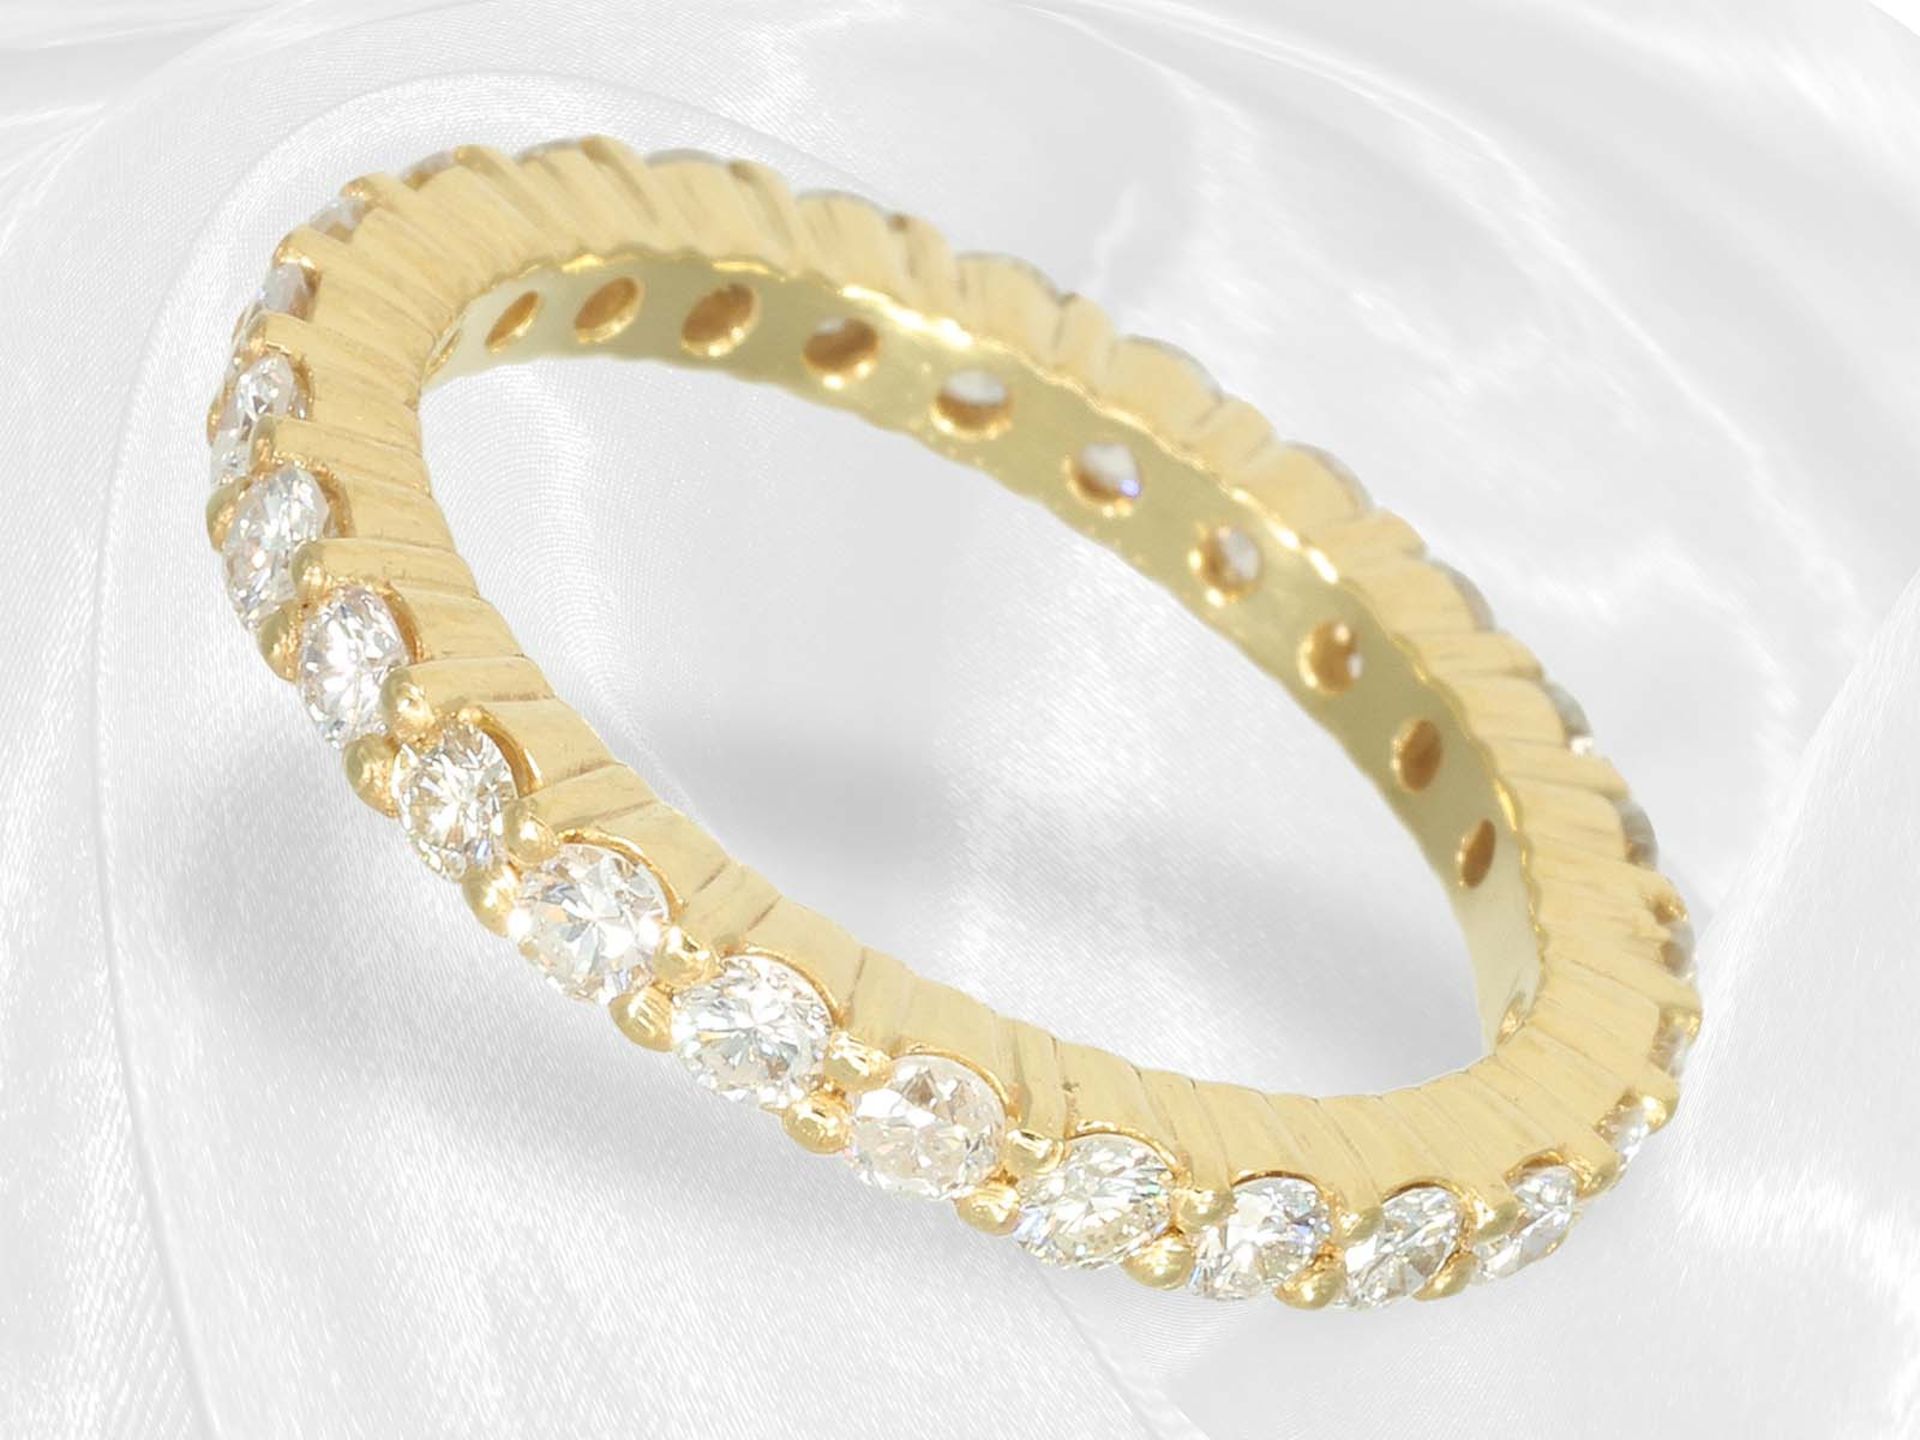 Fine vintage brilliant-cut diamond/memoire gold ring in 18K yellow gold, approx. 0.96ct